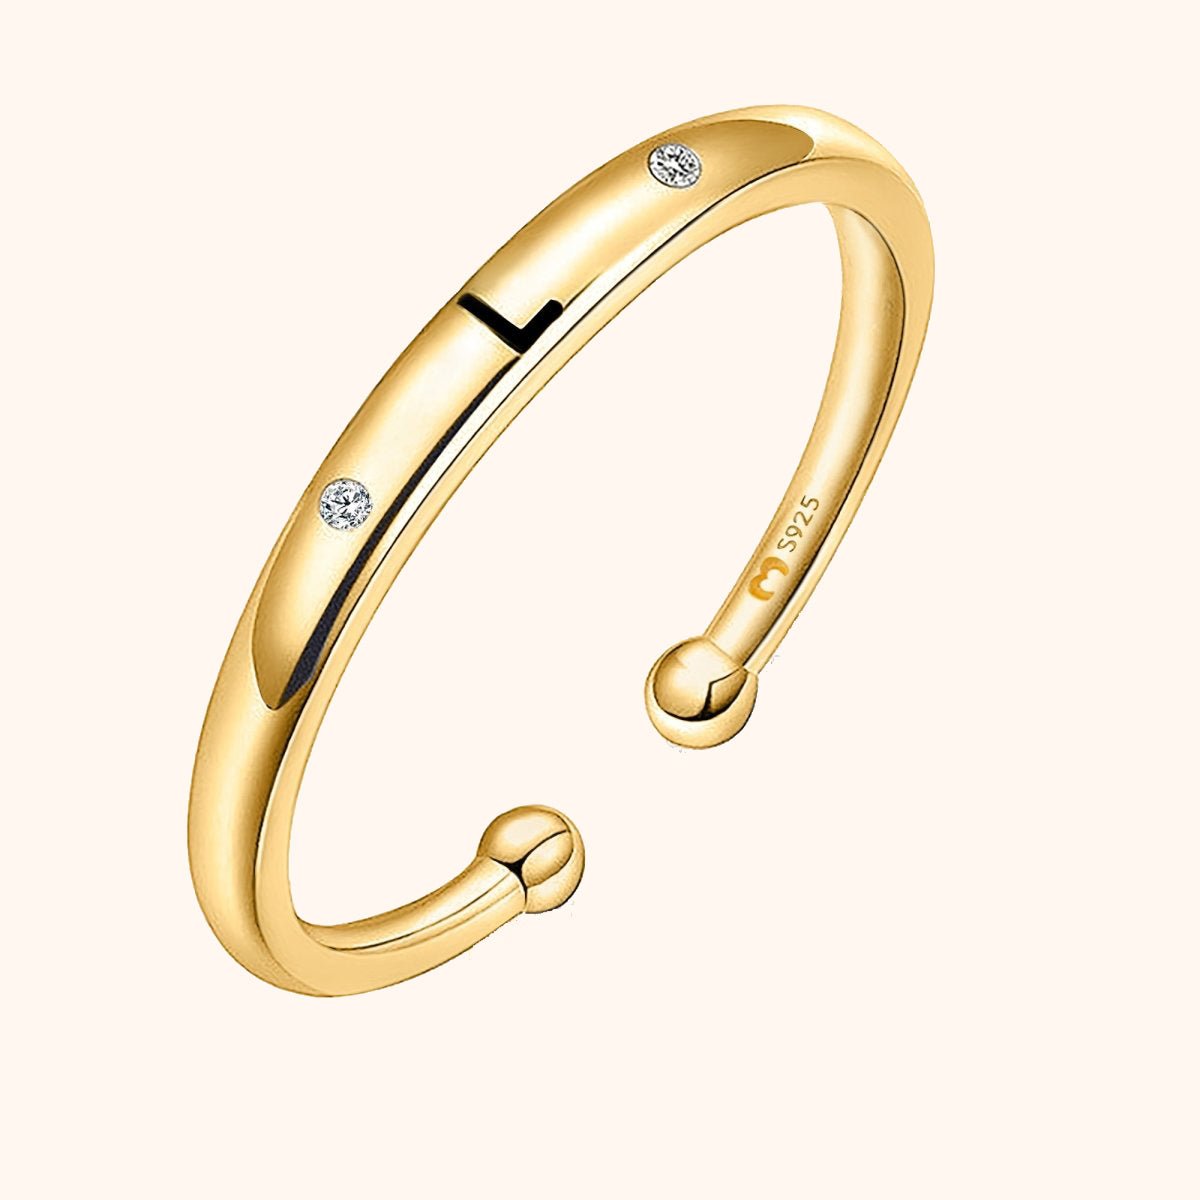 "Initial Letter" Ring - Milas Jewels Shop